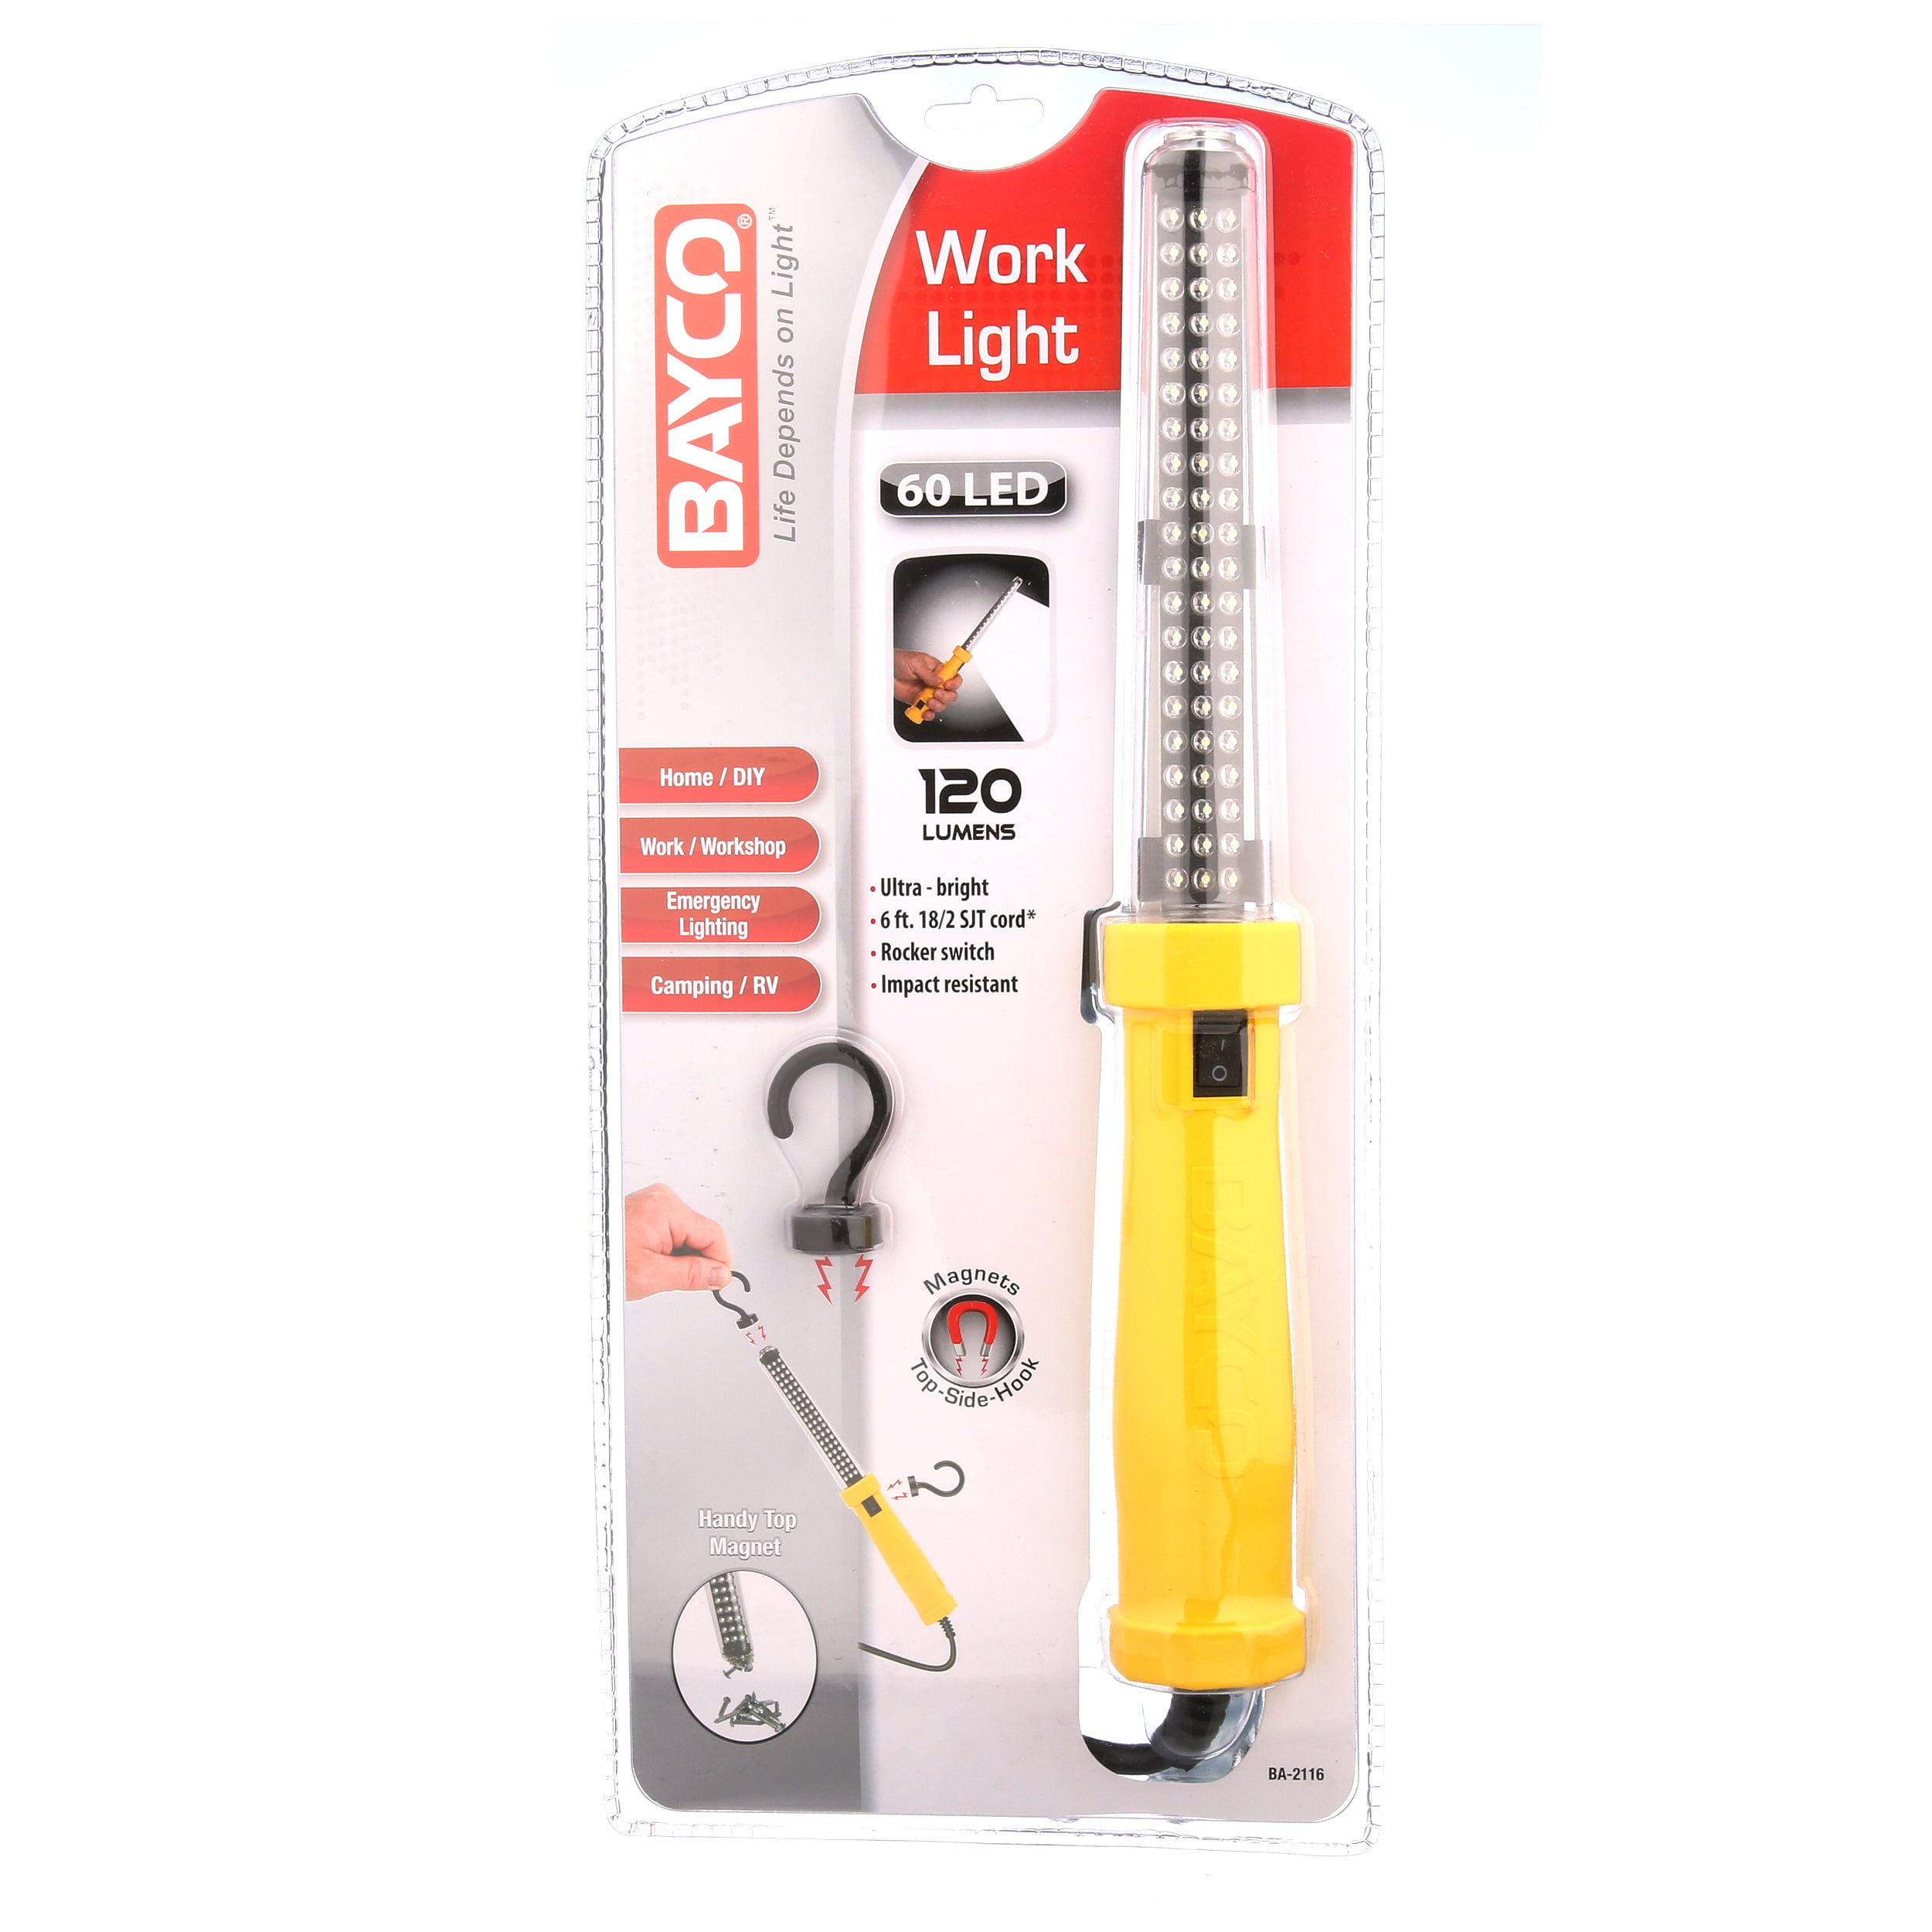 Bayco BA-2116 6 Foot Cord Corded LED Work Light with Magnetic Hook 